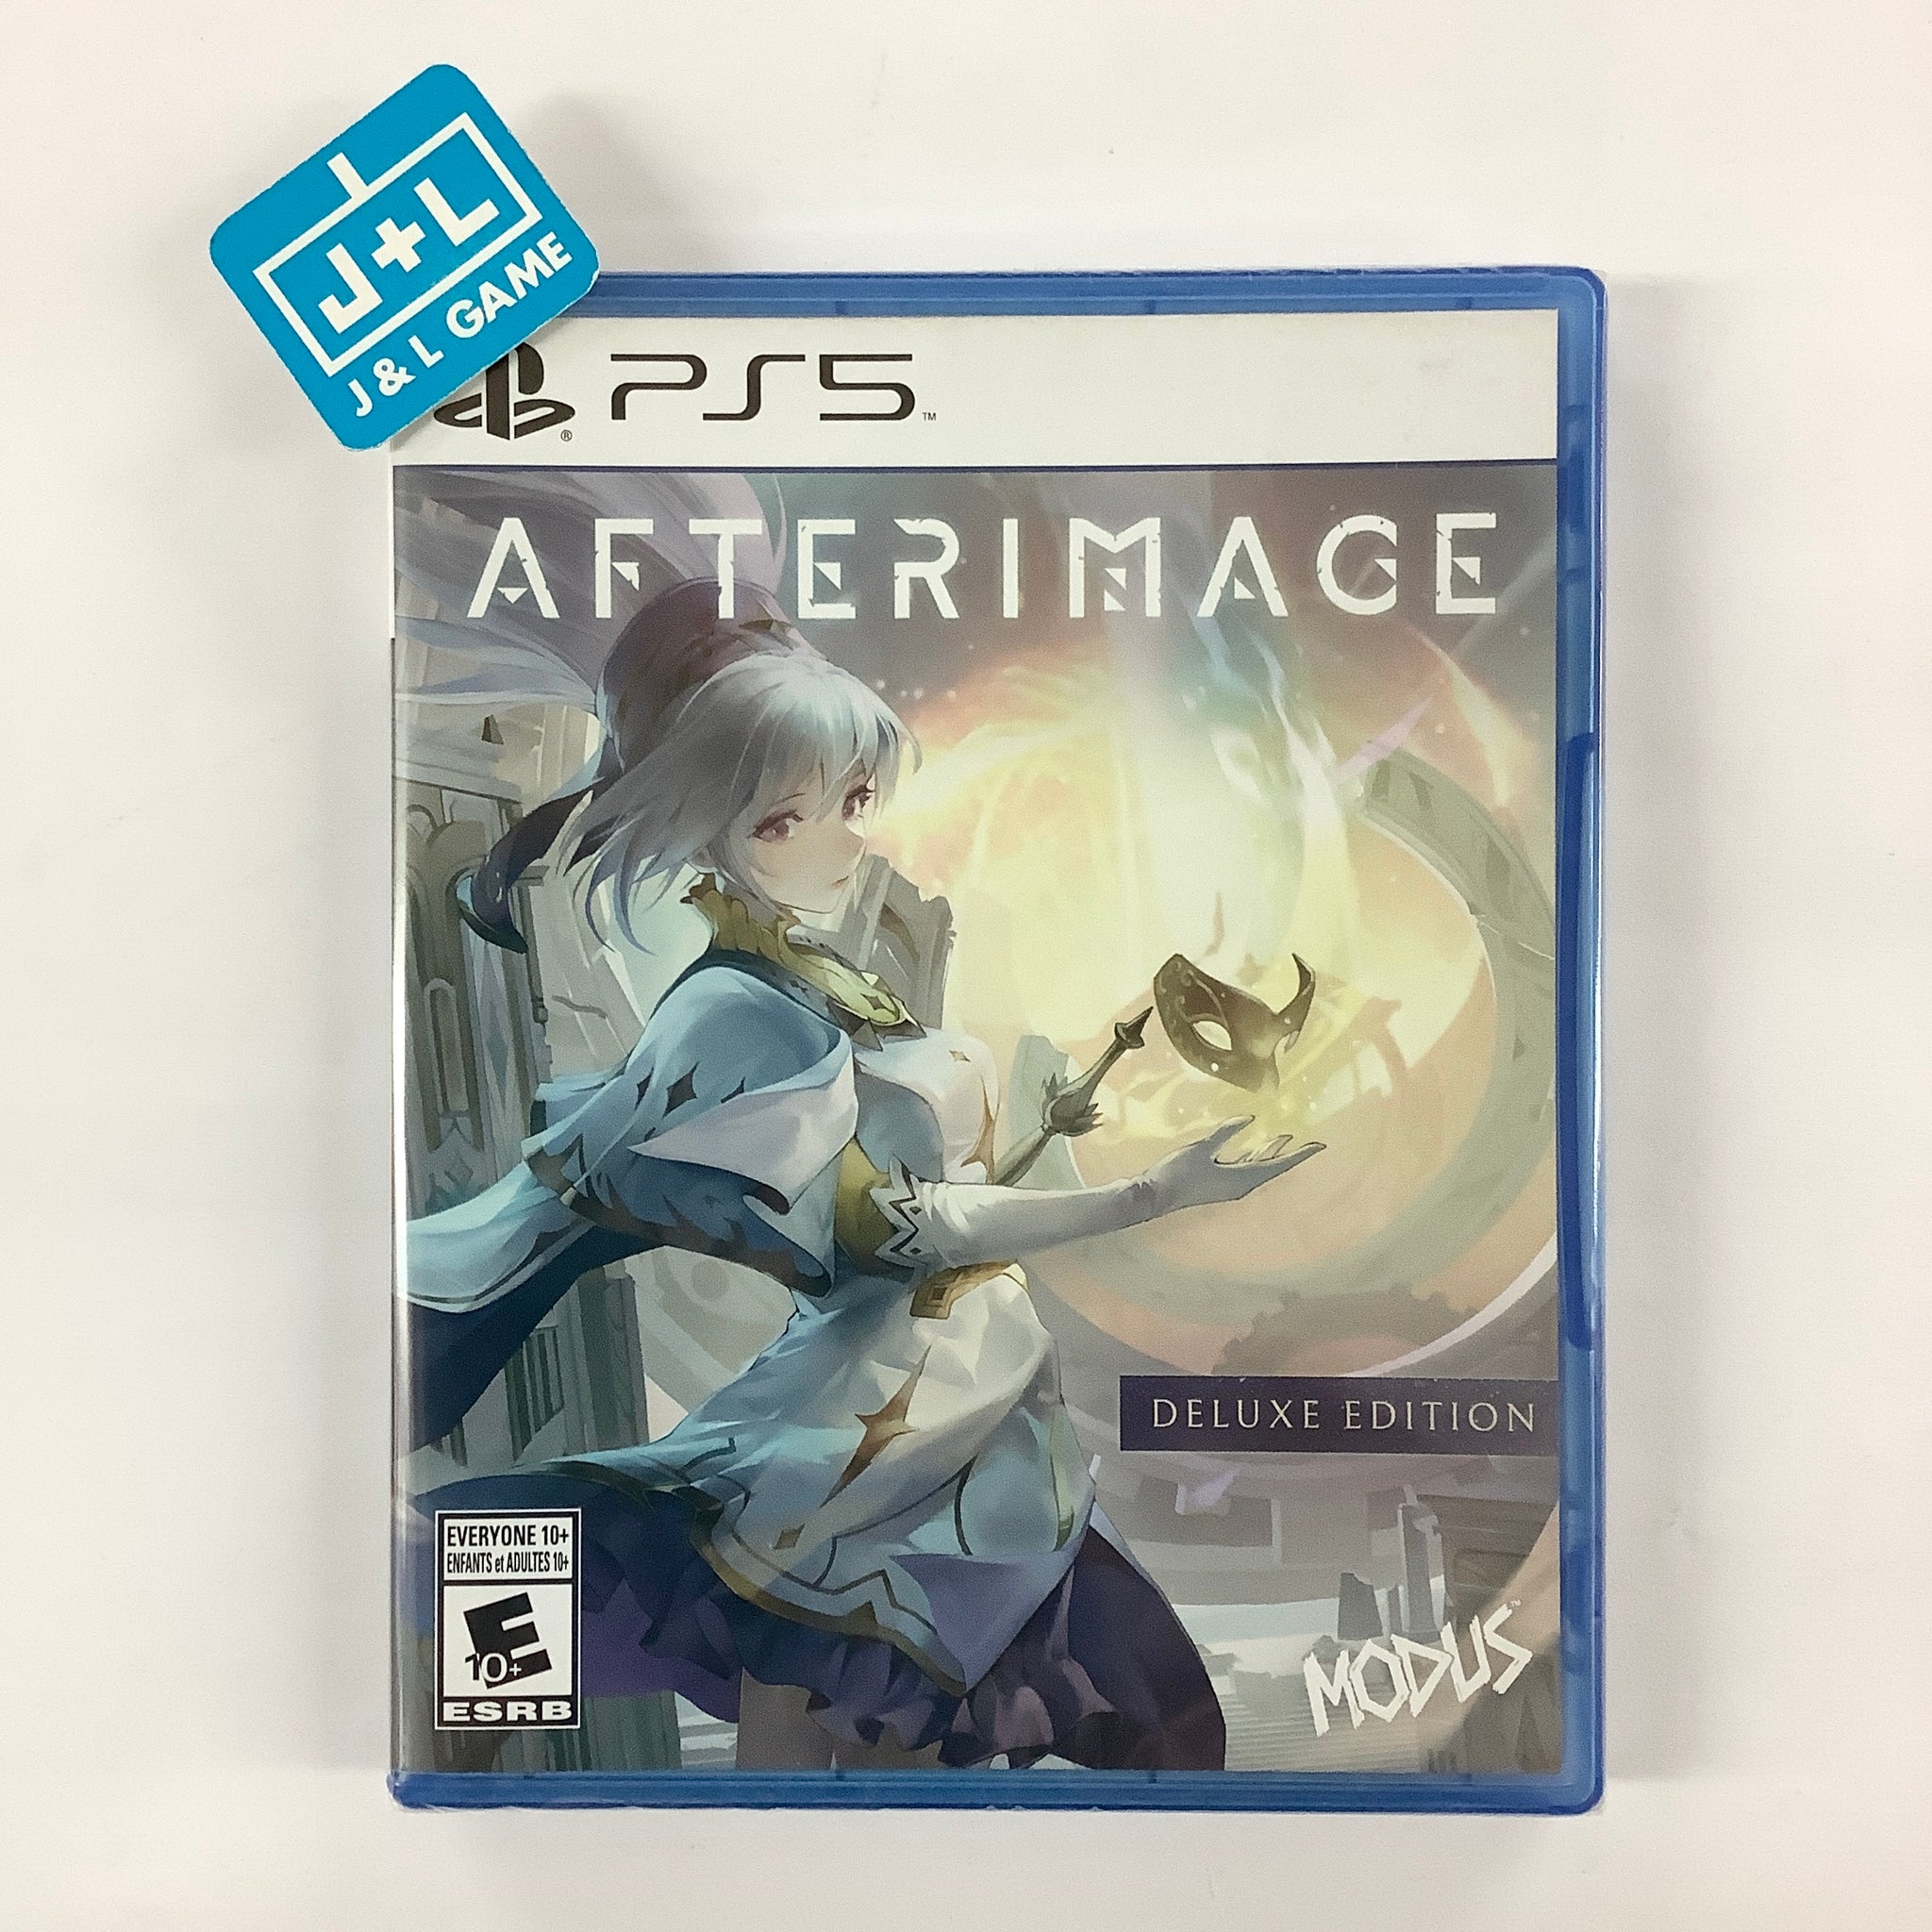 Afterimage: Deluxe Edition - (PS5) PlayStation 5 Video Games Modus   